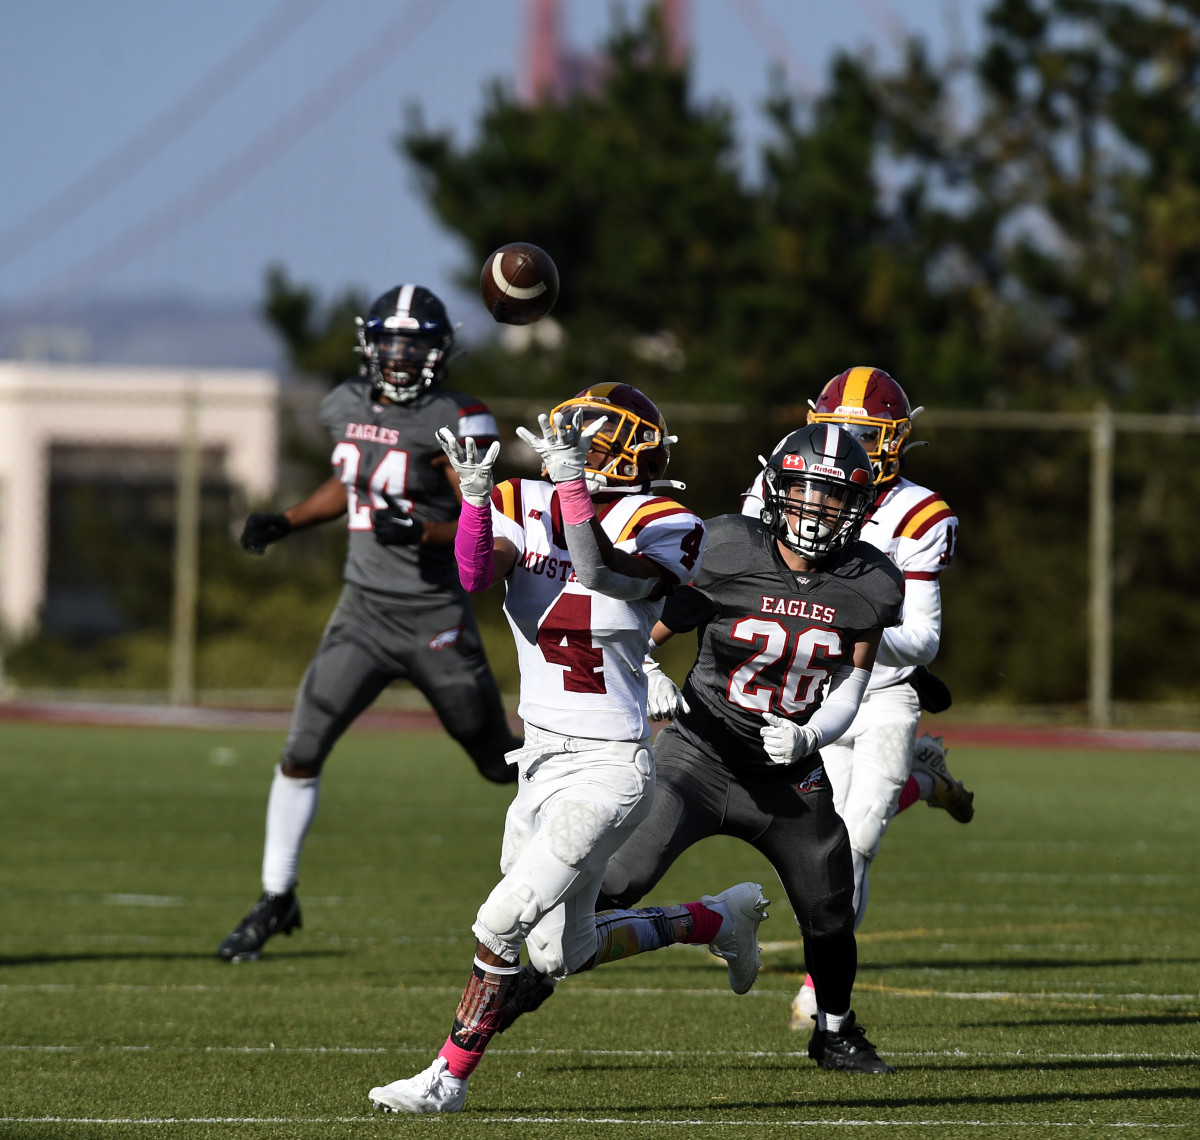 Jamelle Newman (4) with an interception last season in a game at Washington overlooking the Golden Gate Bridge. Photo: Eric Taylor.